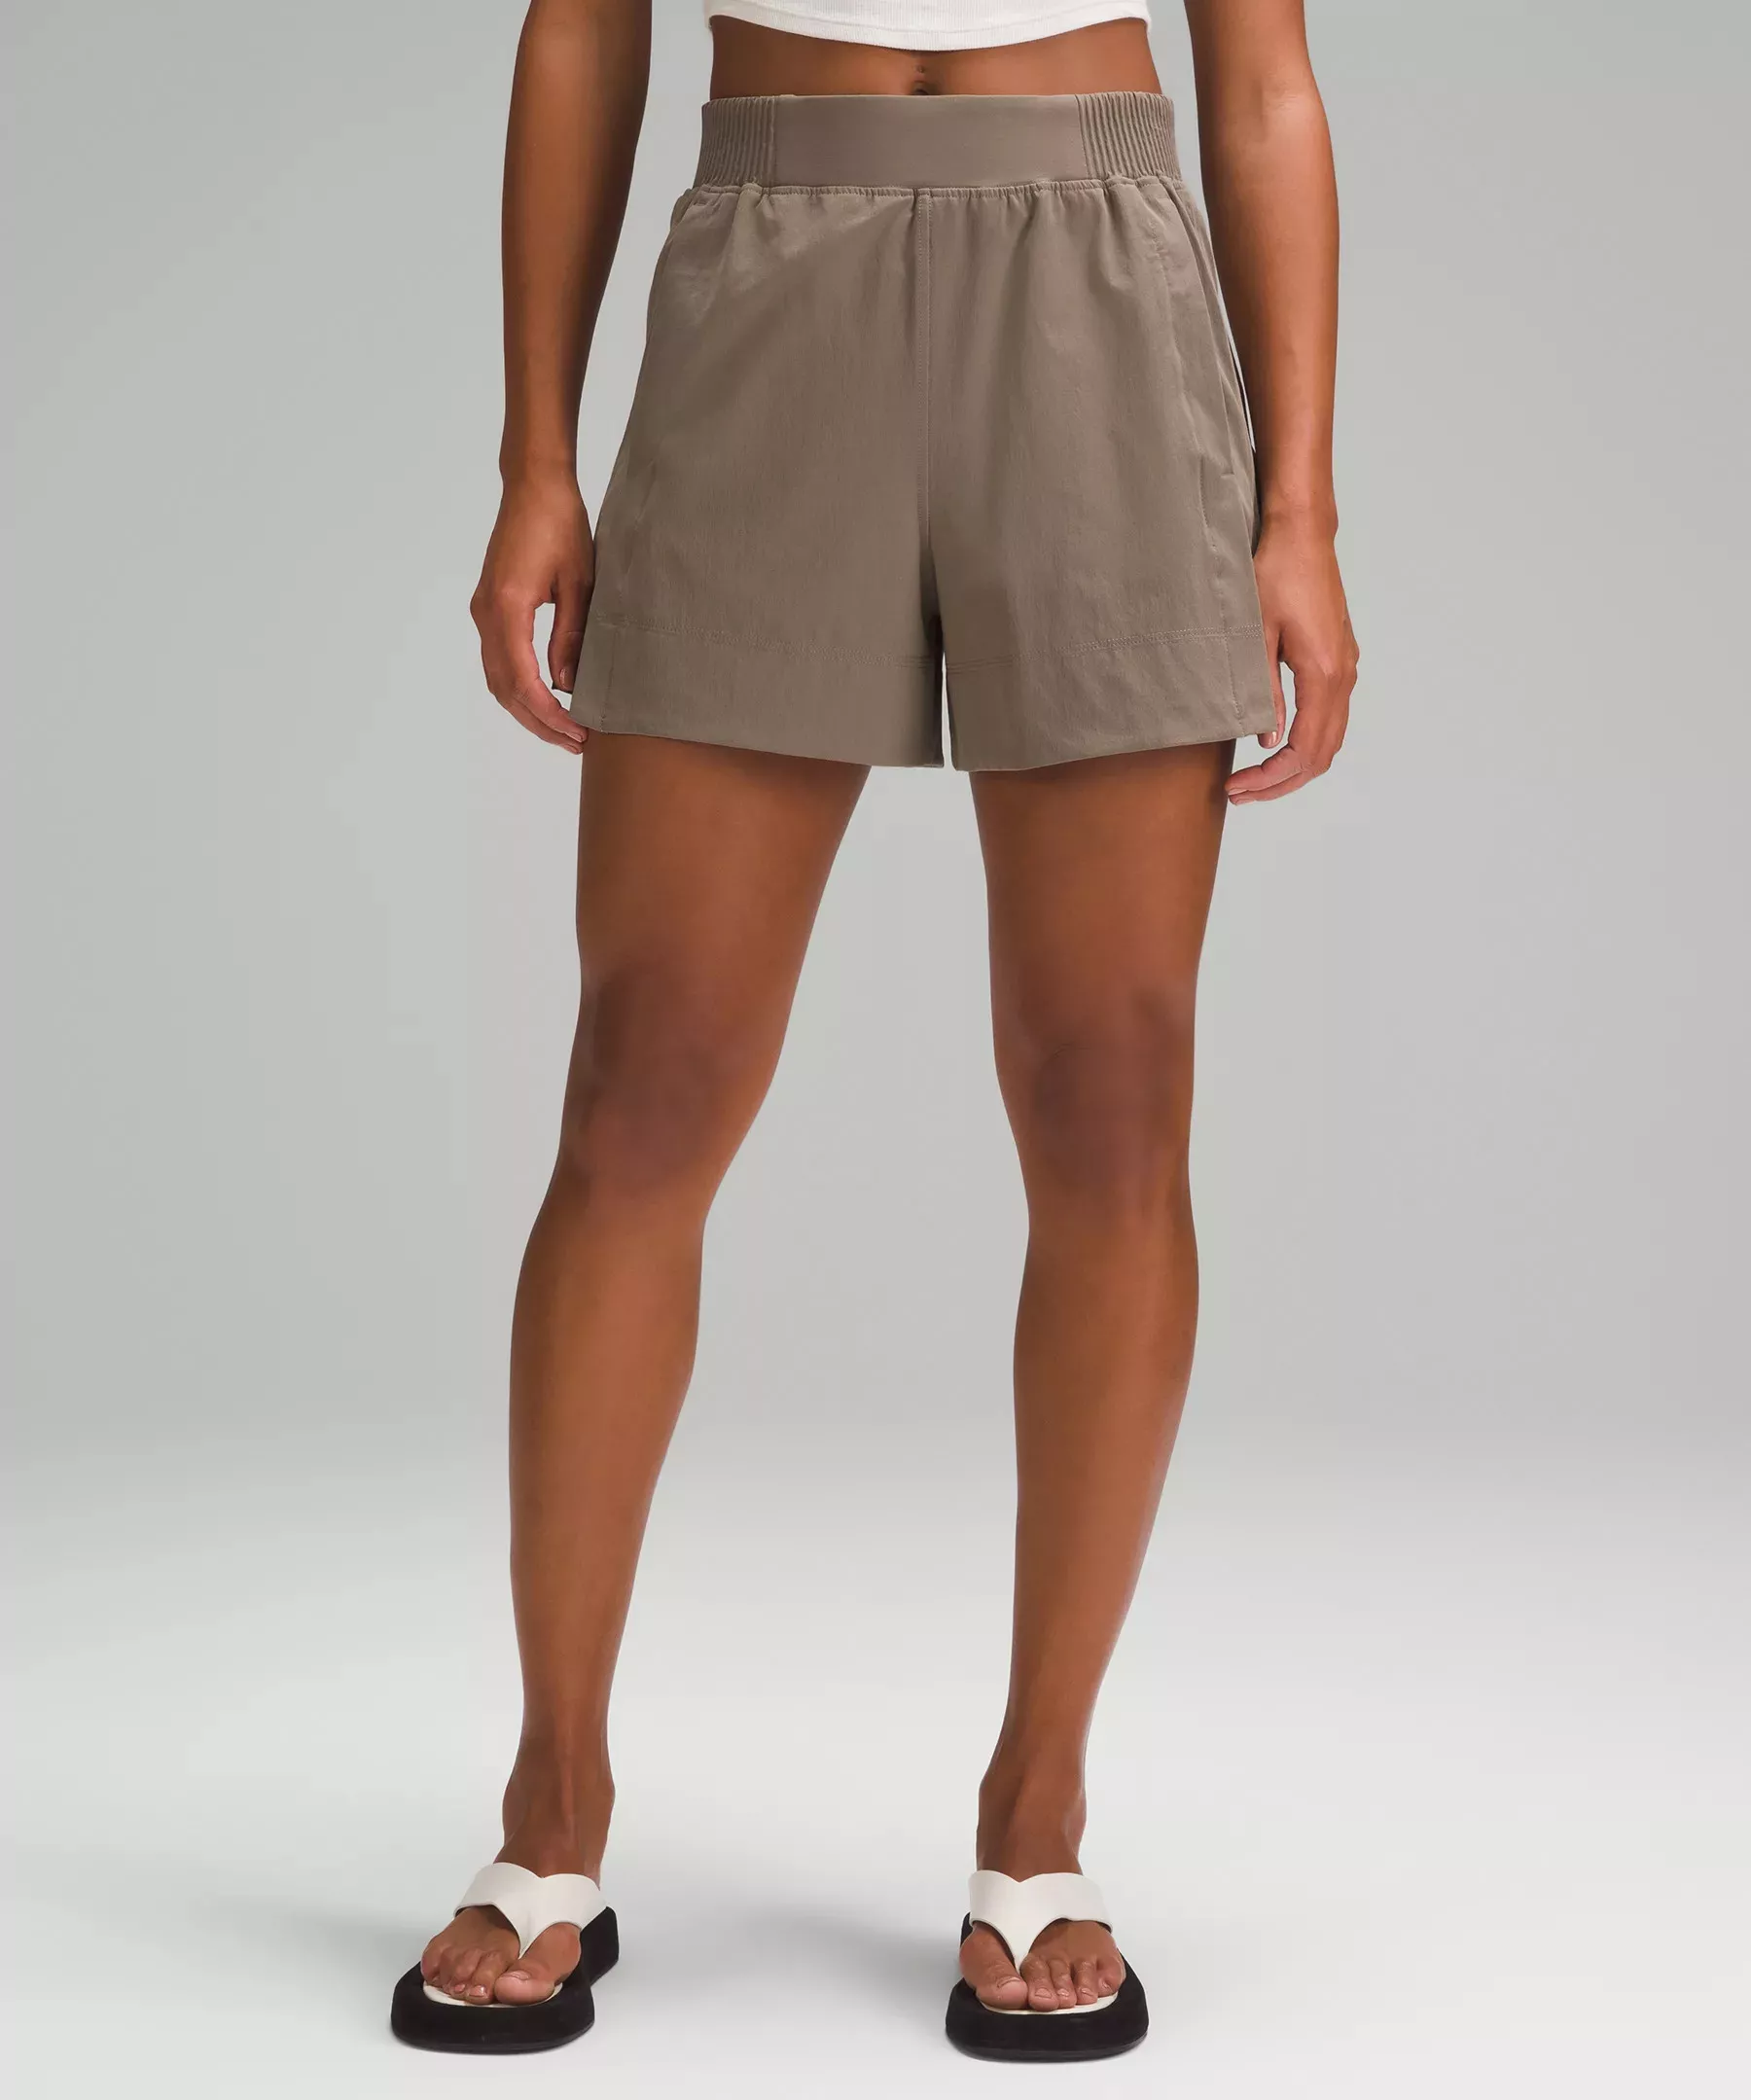 Lululemon athletica Stretch Woven Relaxed-Fit High-Rise Short 4, Women's  Shorts